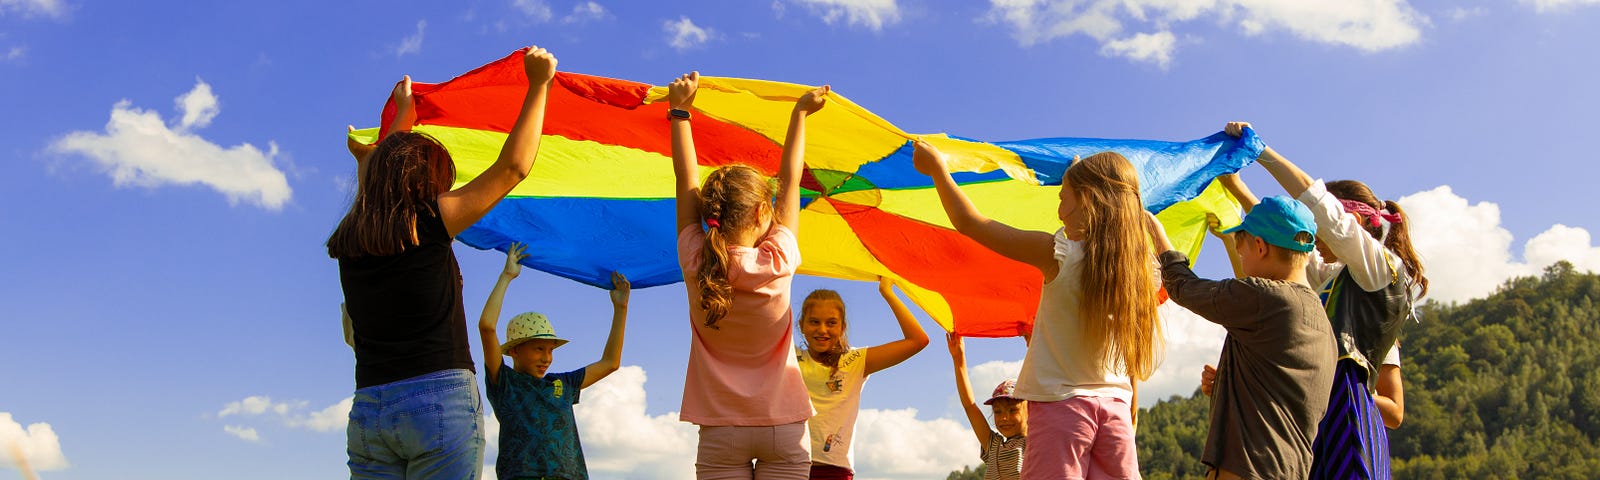 Children stand in a circle holding a colorful parachute sail above their heads.